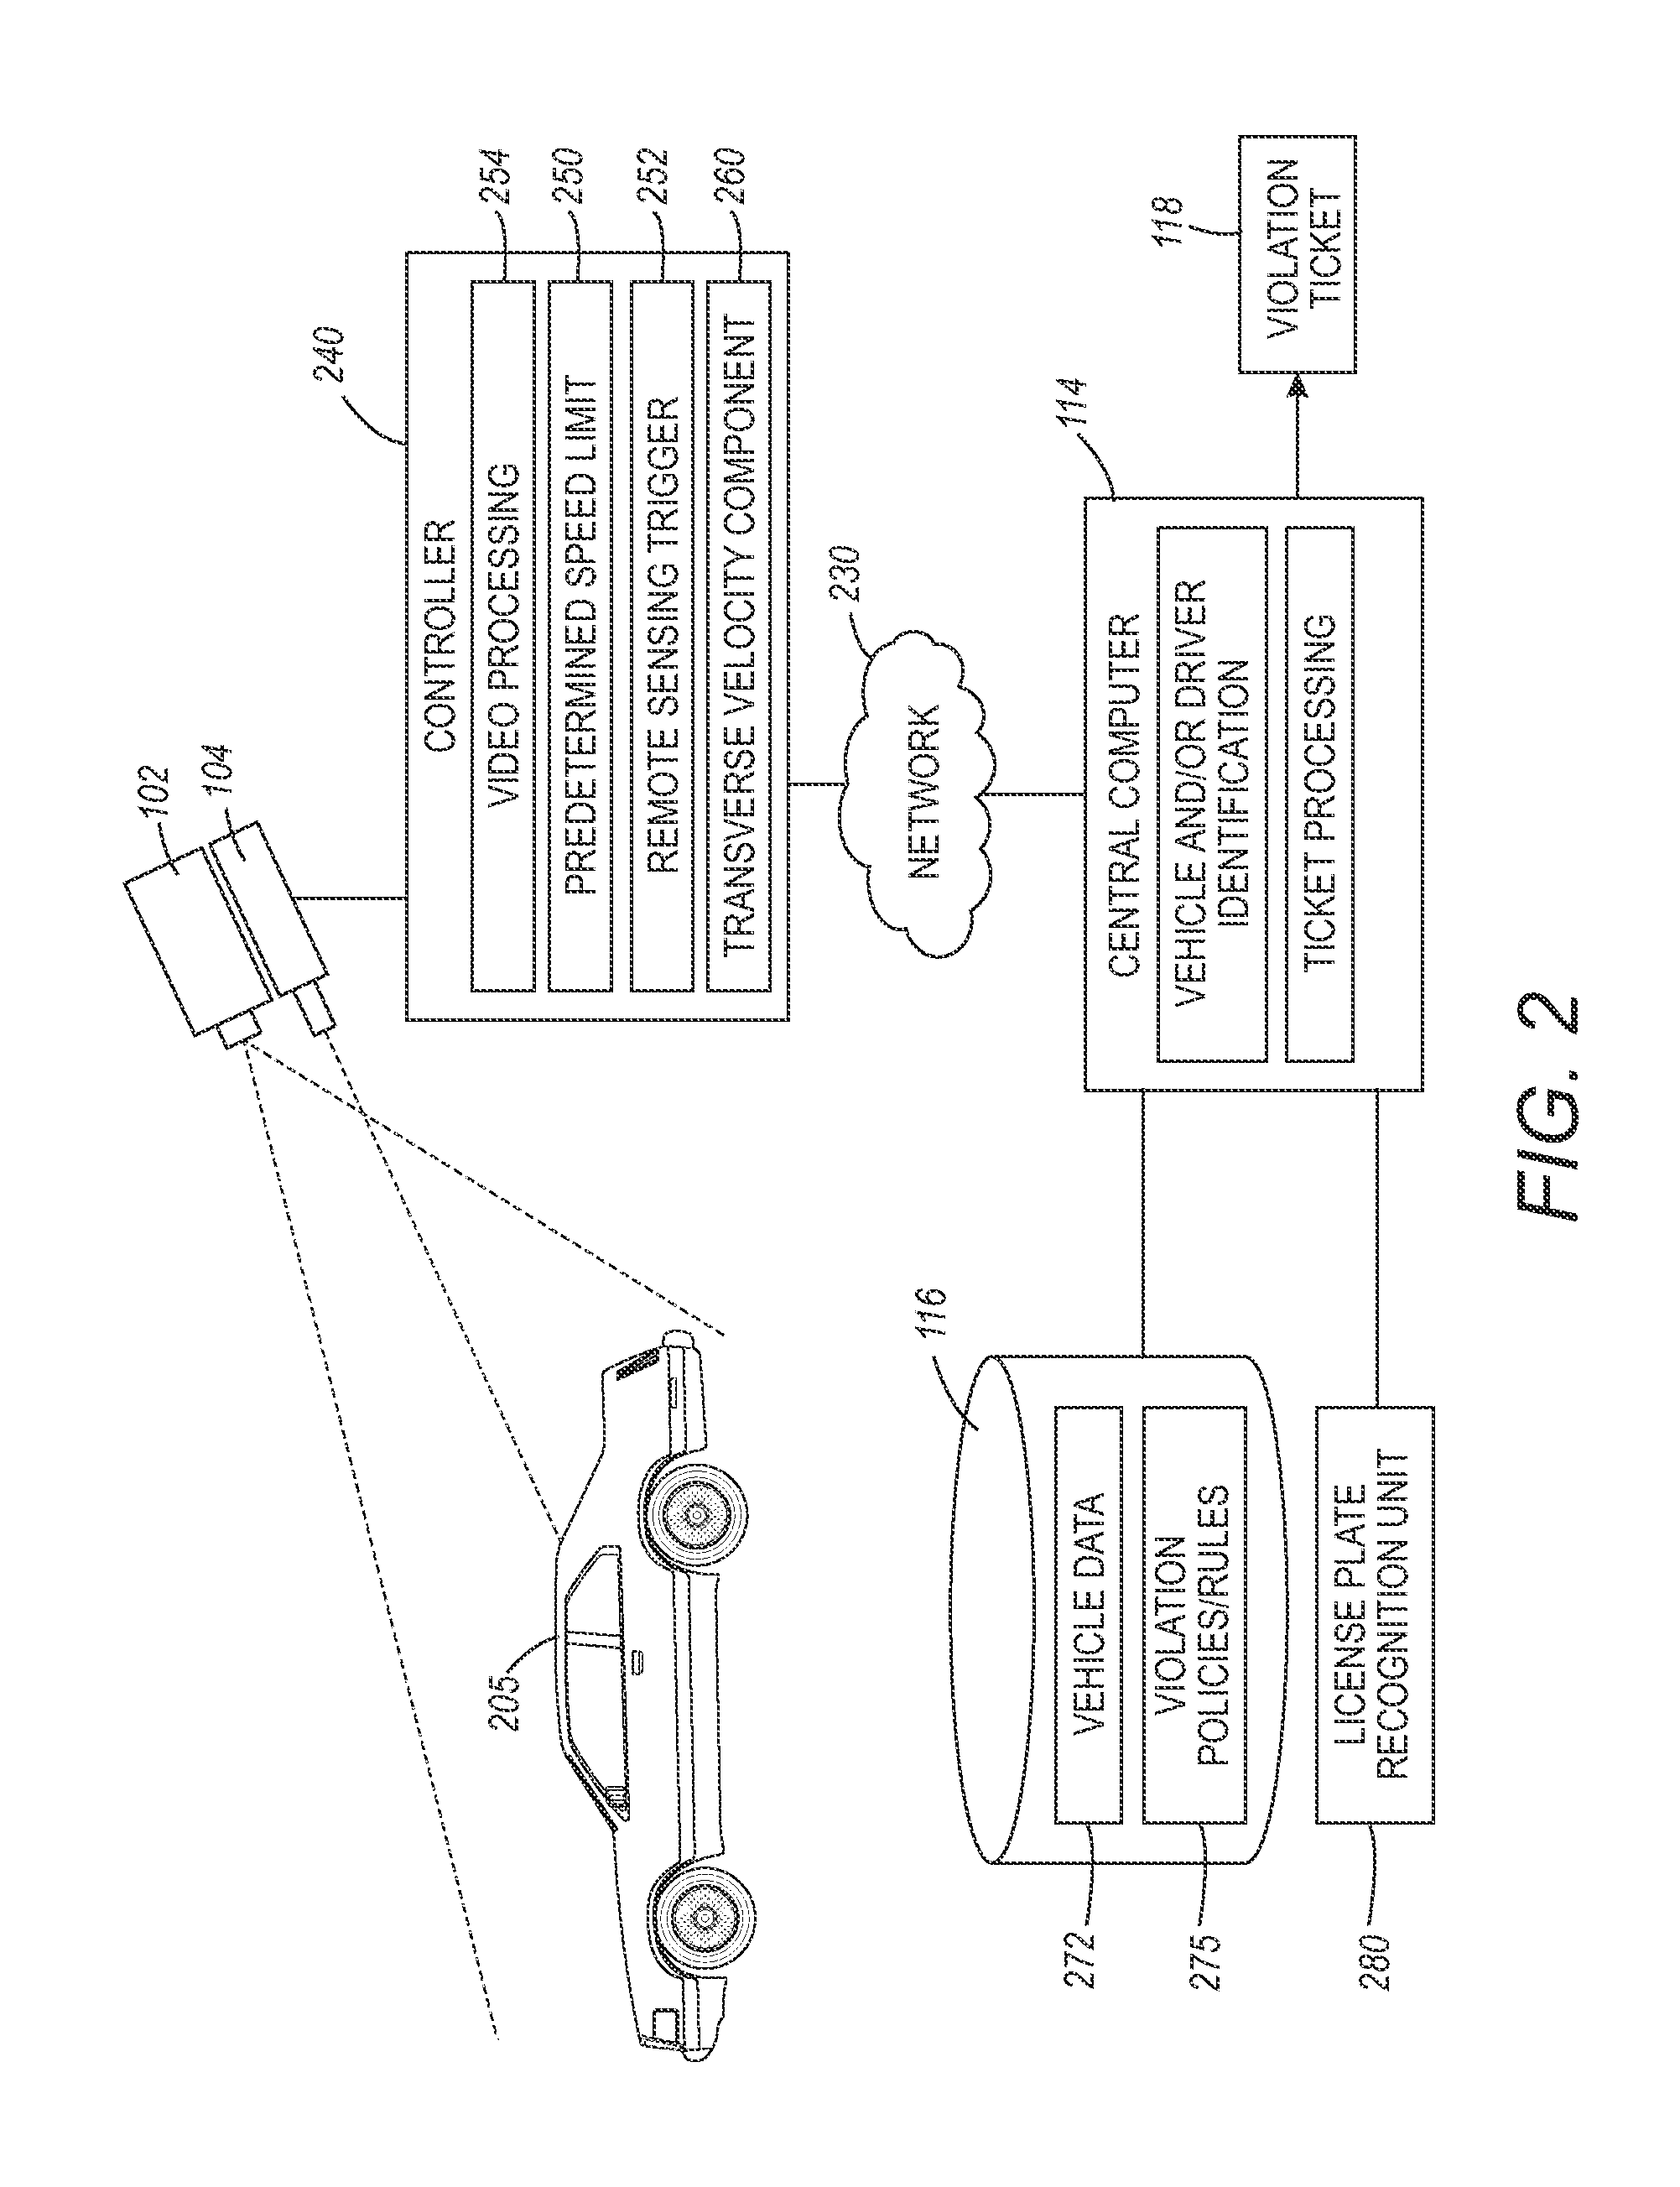 Automated vehicle speed measurement and enforcement method and system